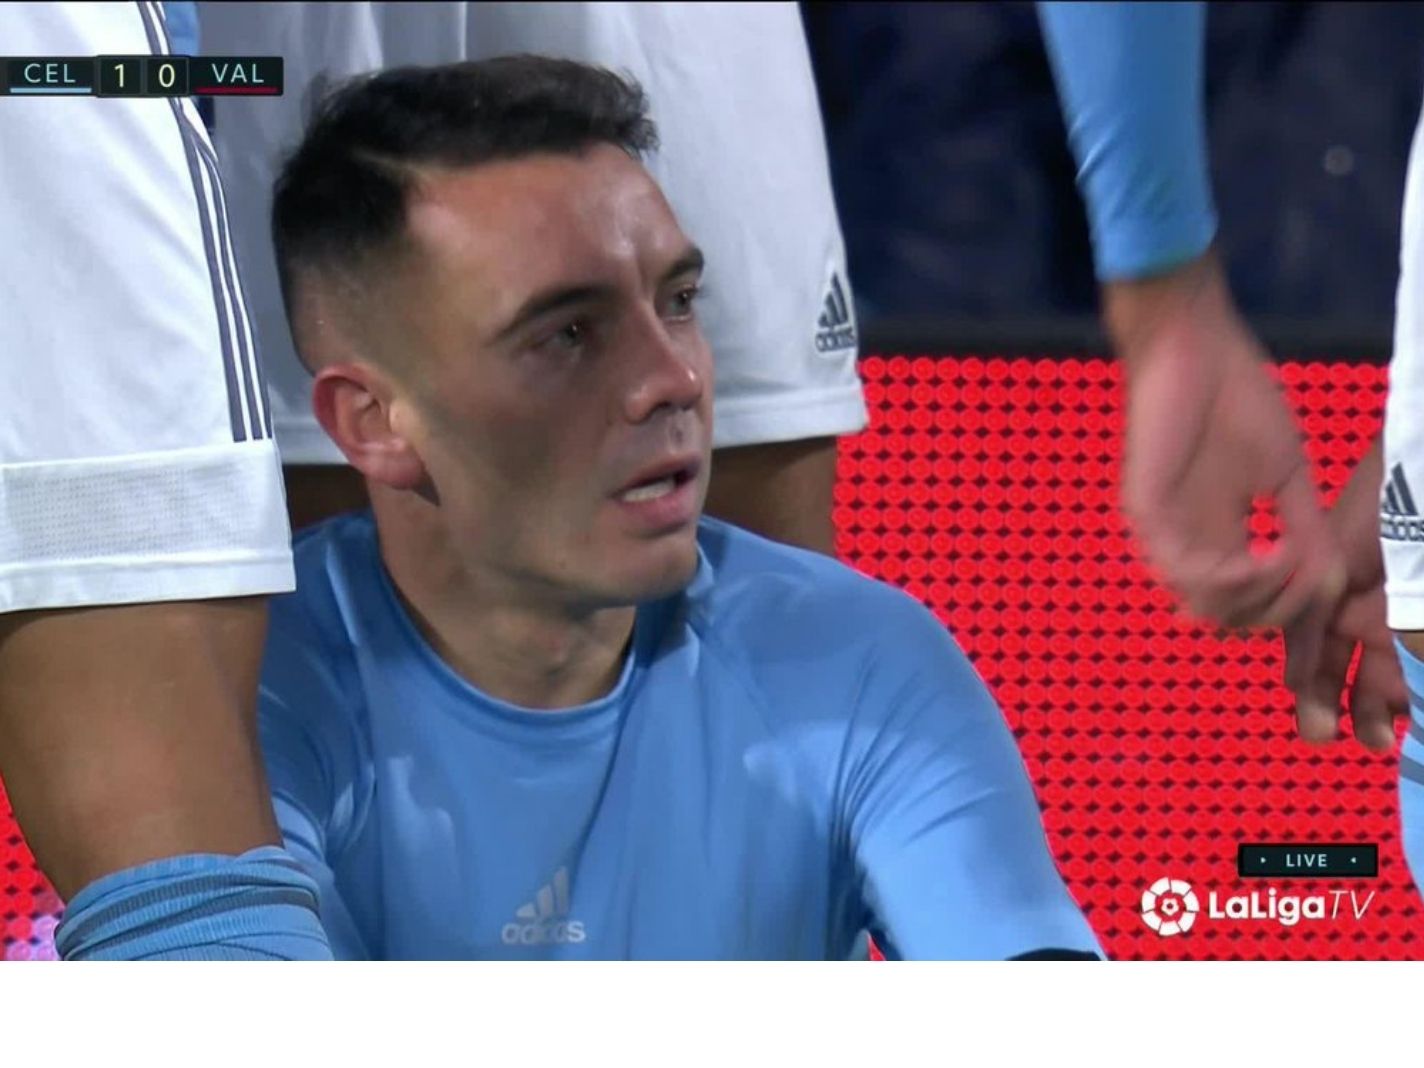 Yellow card rule prompts Iago Aspas to get deliberately booked